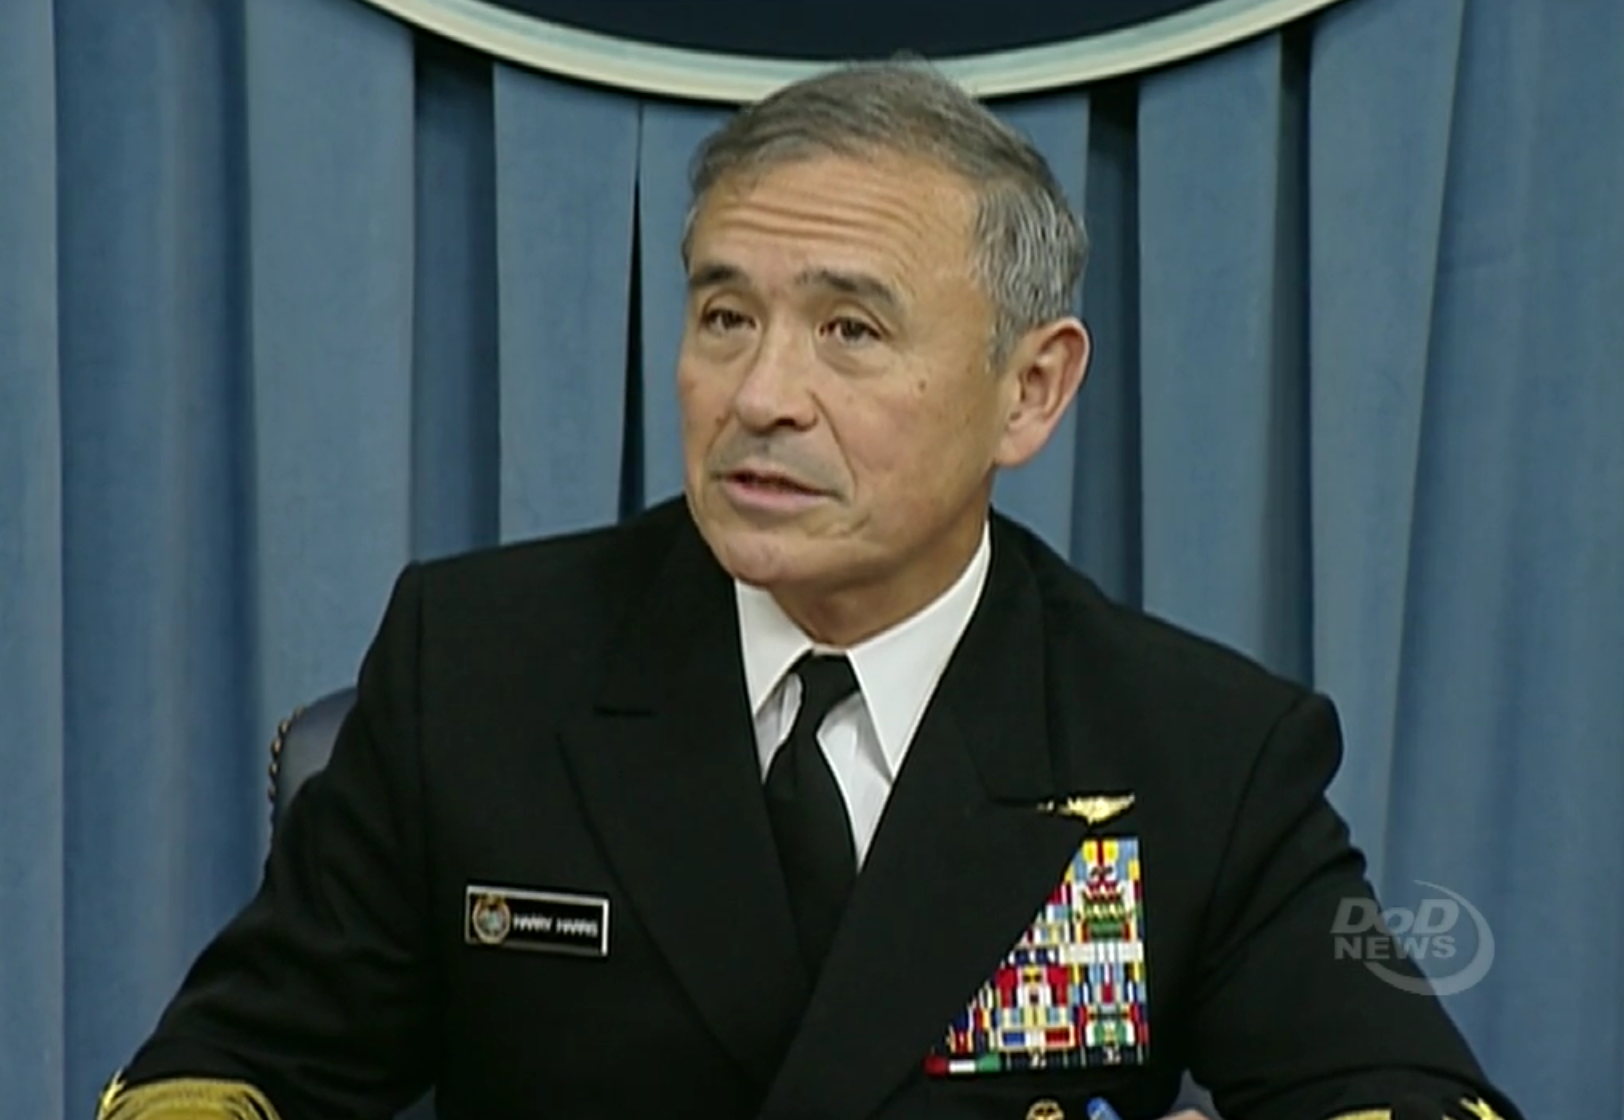 U.S. Pacific Command commander Adm. Harry Harris on Feb. 25, 2016 addressing reporters in the Pentagon. DoD News Image